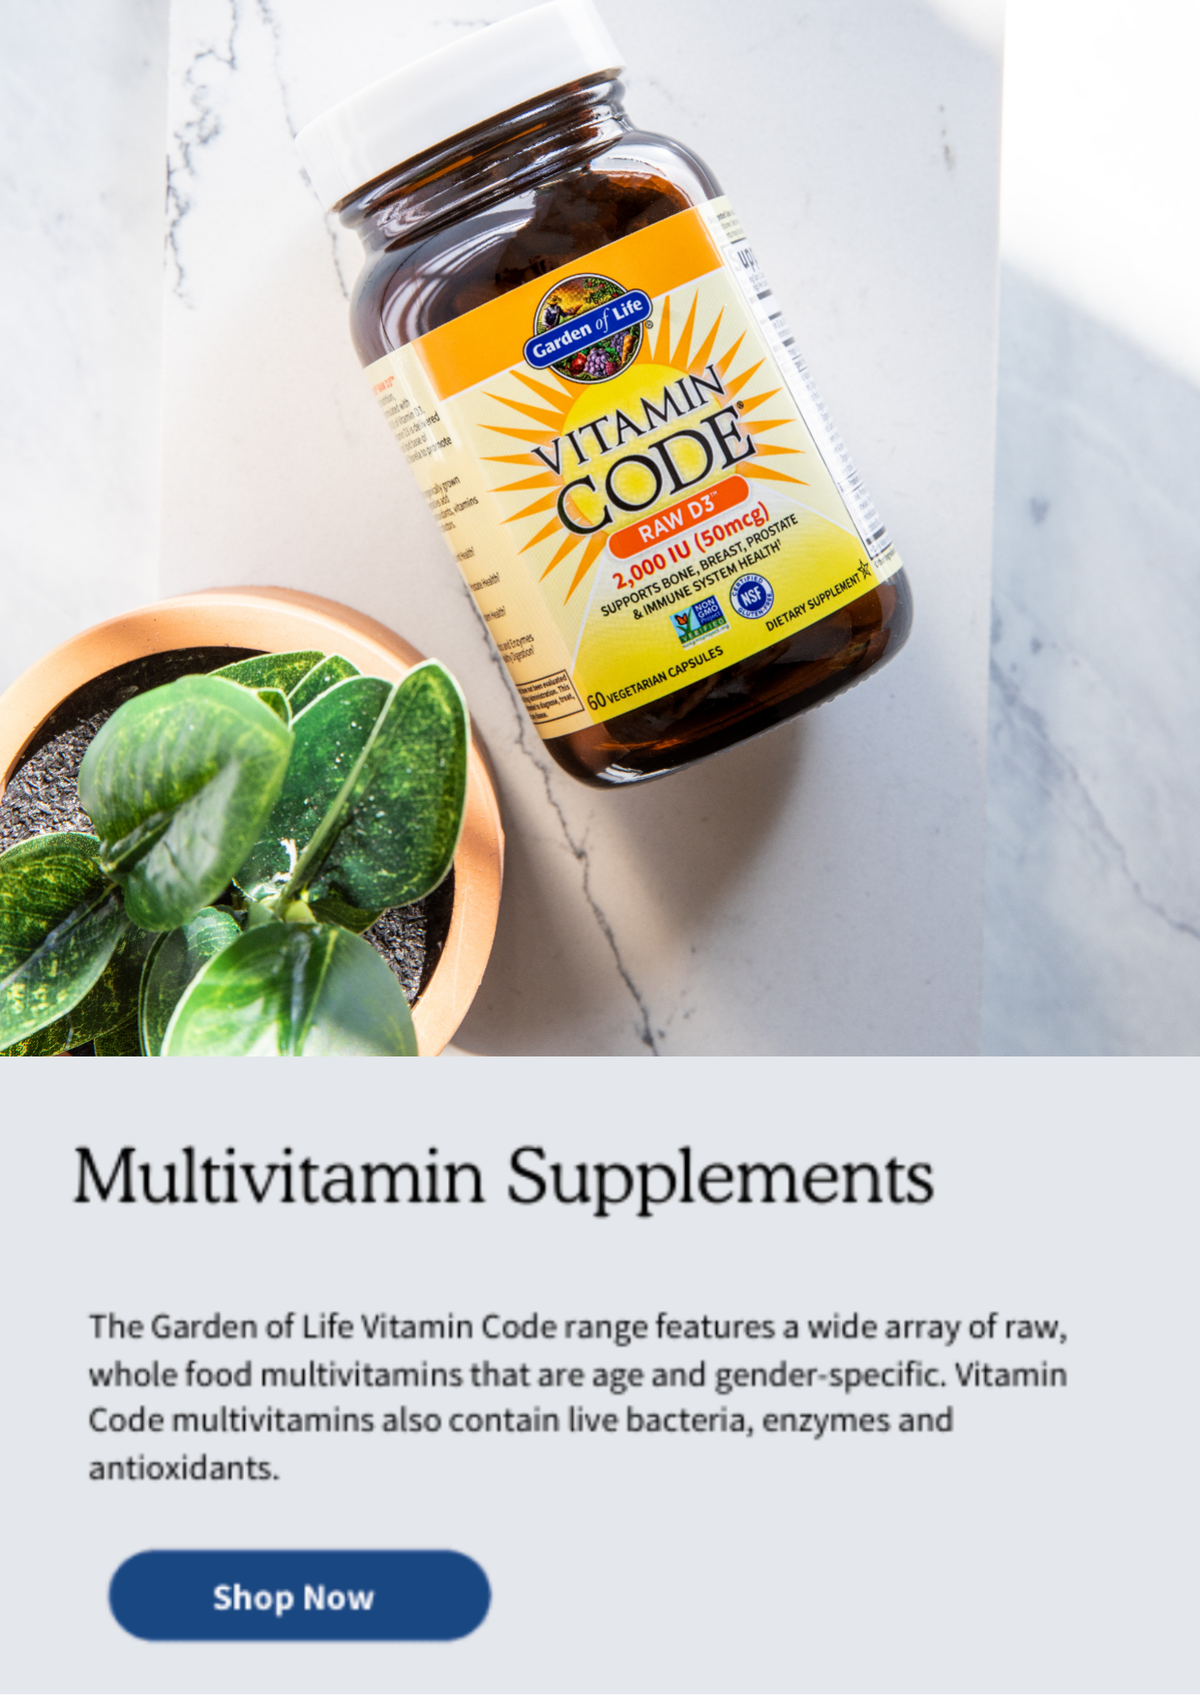 Multivitamin Supplements. The Garden of Life Vitamin Code range features a wide array of raw, whole food multivitamins that are age and gender-specific. Vitamin Code multivitamins also contain live bacteria, enzymes and antioxidants.